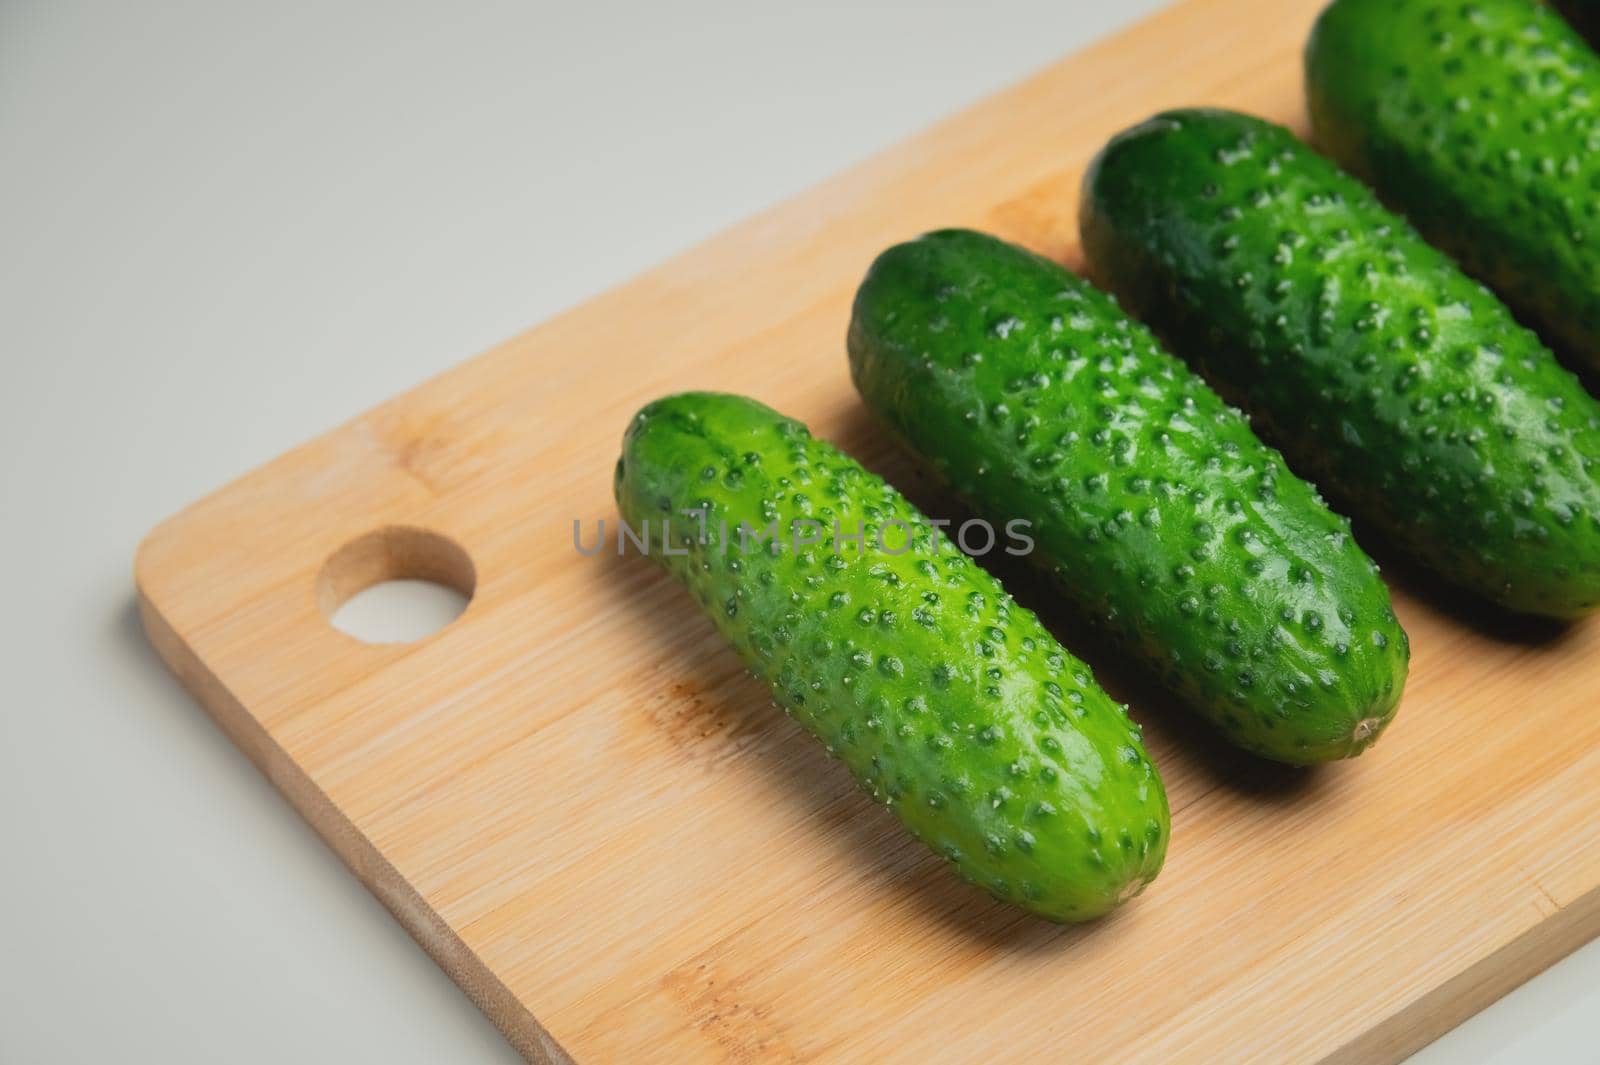 juicy ripe cucumber in half lies on a wooden cutting board. top view, shooting on the table.